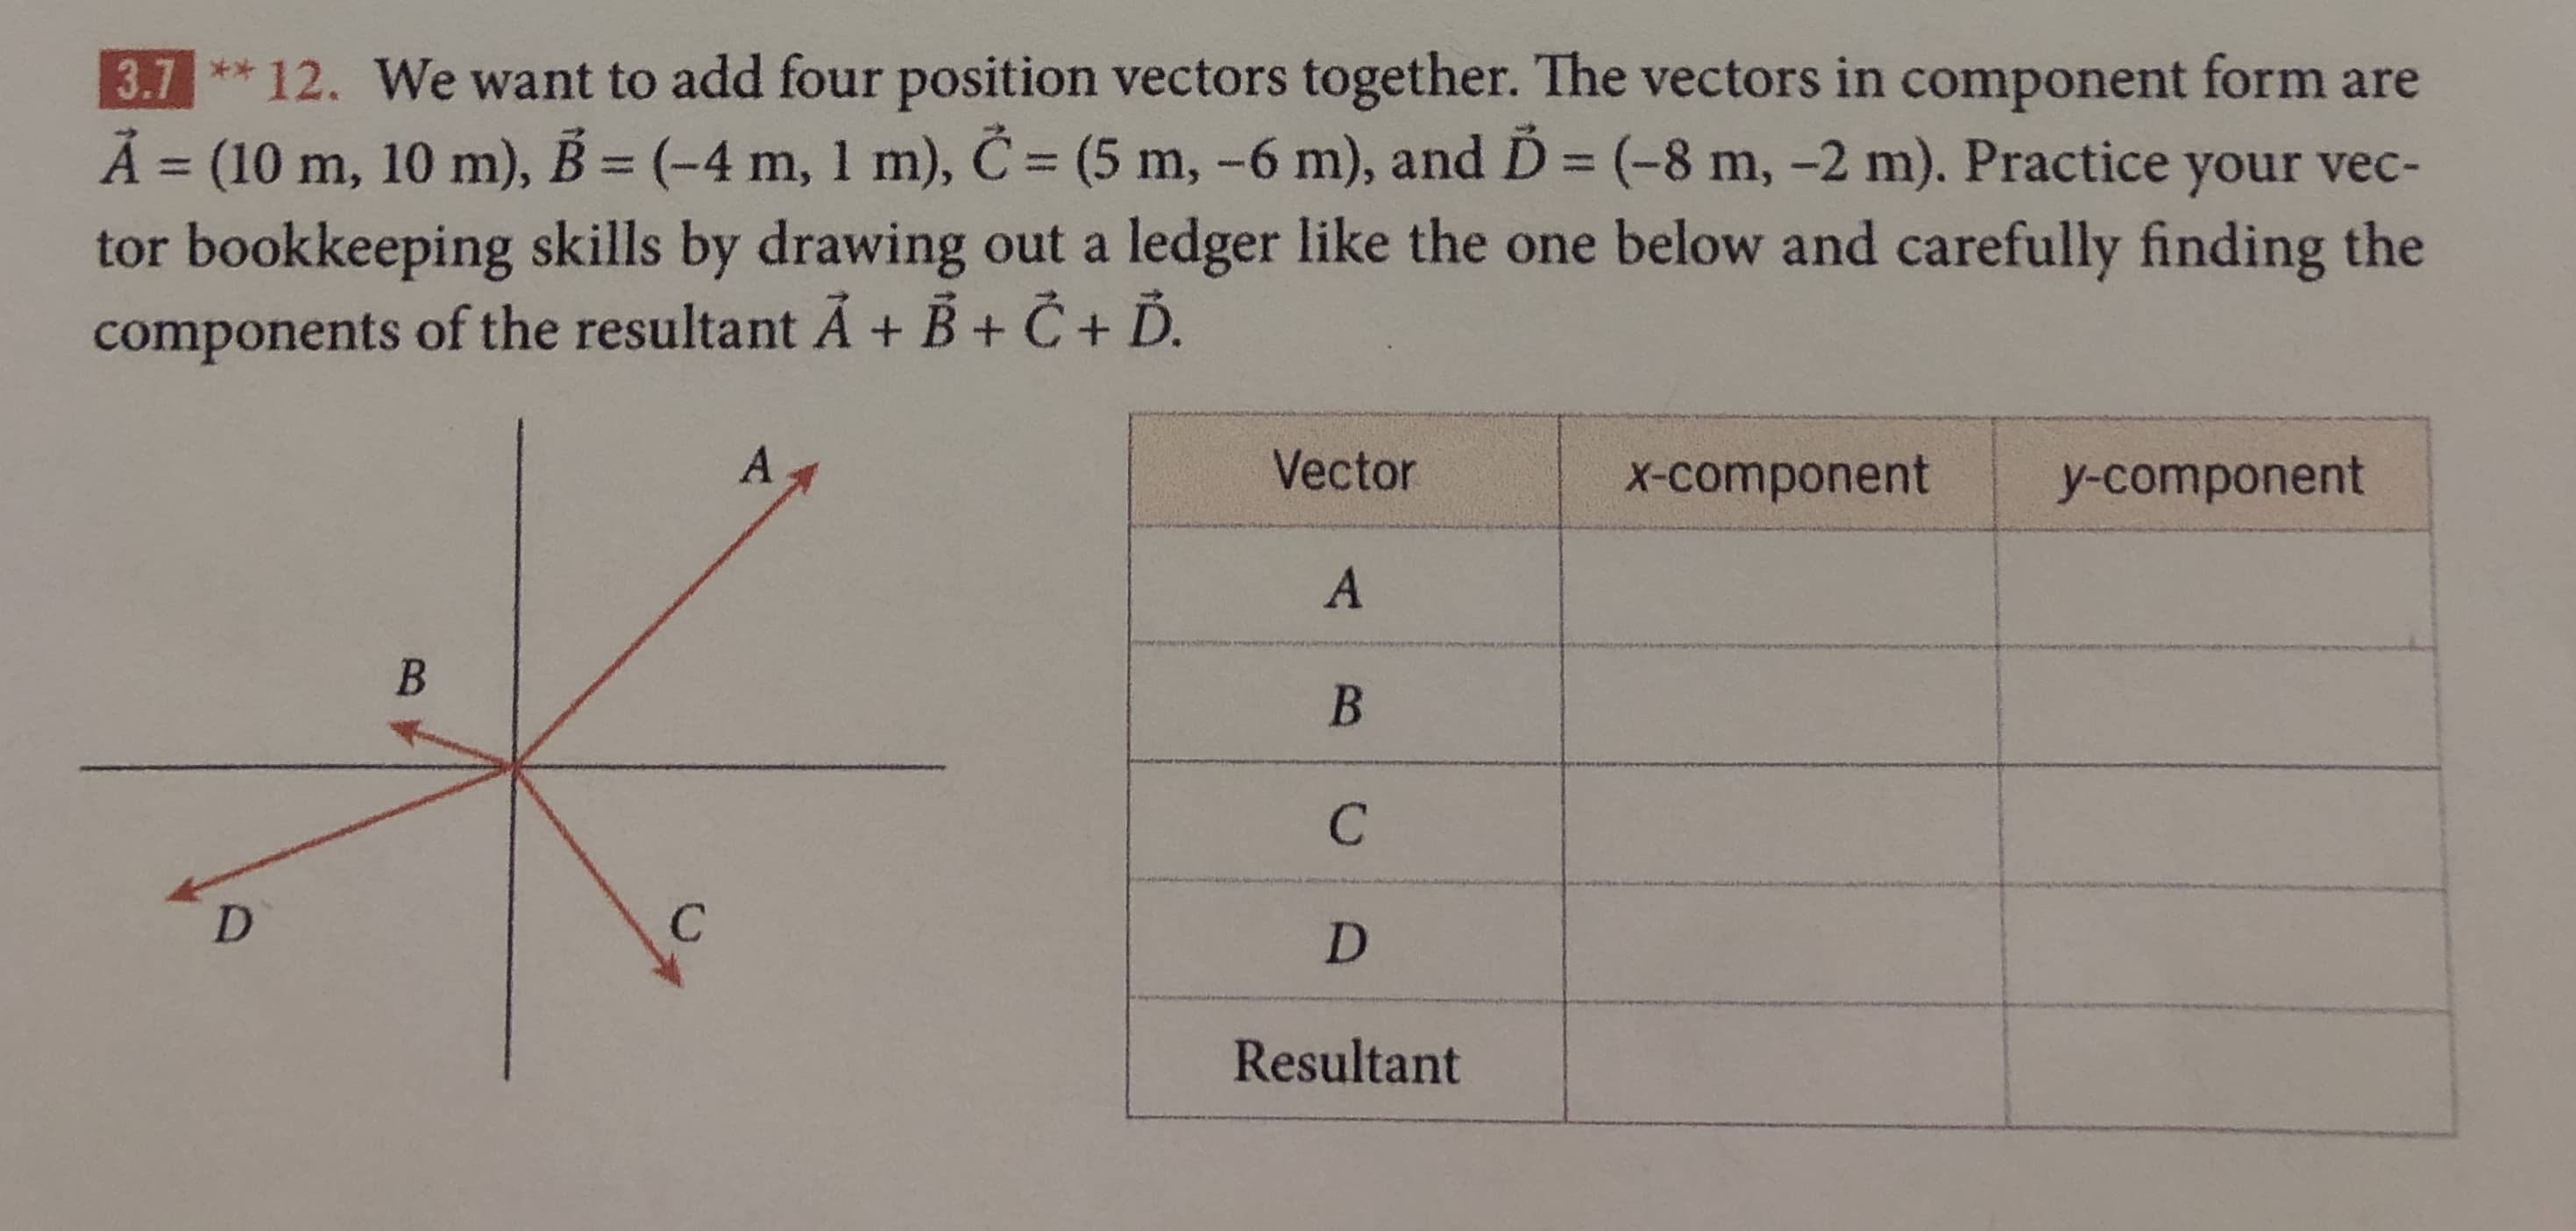 3.7** 12. We want to add four position vectors together. The vectors in component form are
A (10 m, 10 m), B (-4 m, 1 m), C (5 m, -6 m), and D (-8 m, -2 m). Practice your vec-
tor bookkeeping skills by drawing out a ledger like the one below and carefully finding the
components of the resultant A + B + C+ D
A
Vector
x-component
y-component
A
B
B
C
C
D
D
Resultant
